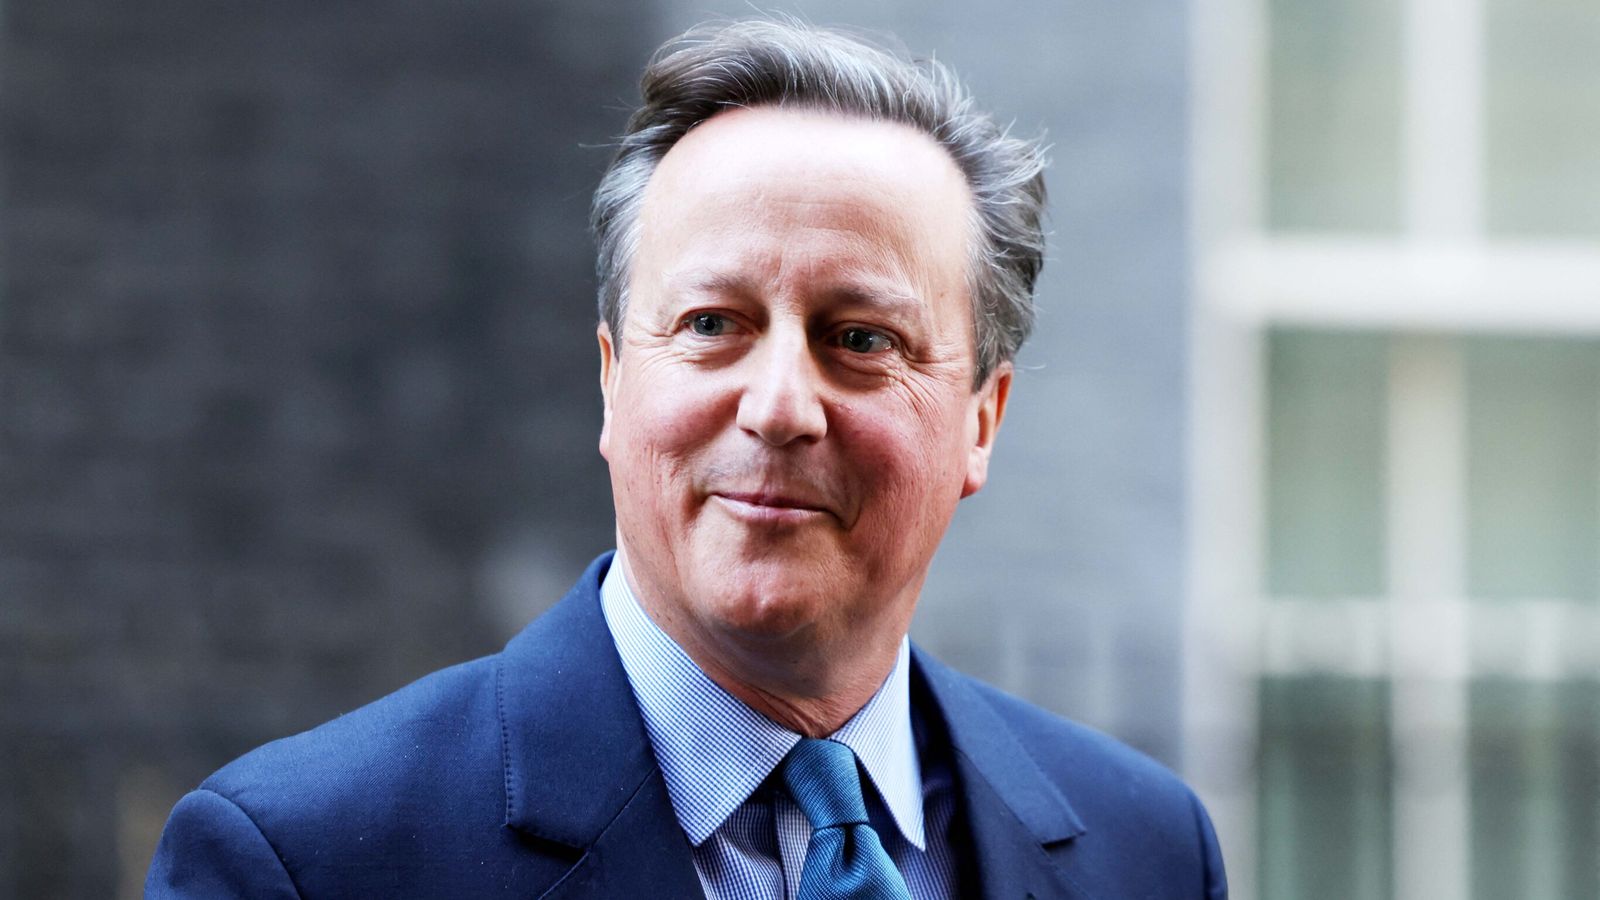 David Cameron appointed foreign secretary and made peer in shock cabinet reshuffle move